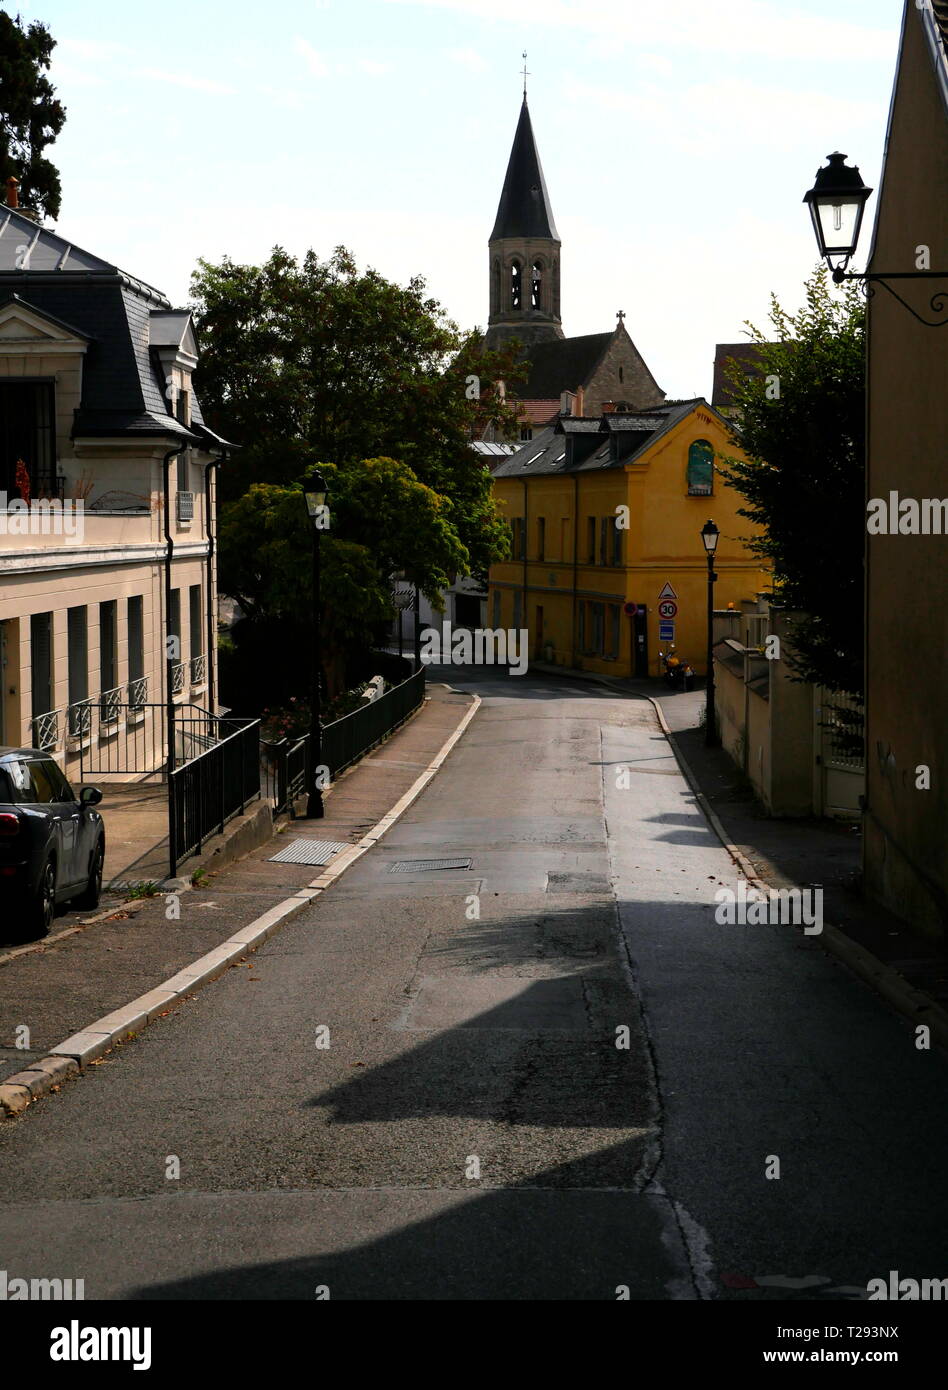 AJAXNETPHOTO. LOUVECIENNES, FRANCE. - ROAD LEADING TO THE CHURCH EGLISE SAINT-MARTIN IN THE CENTRE OF THE VILLAGE. PHOTO:JONATHAN EASTLAND/AJAX REF:GX8 181909 403 Stock Photo